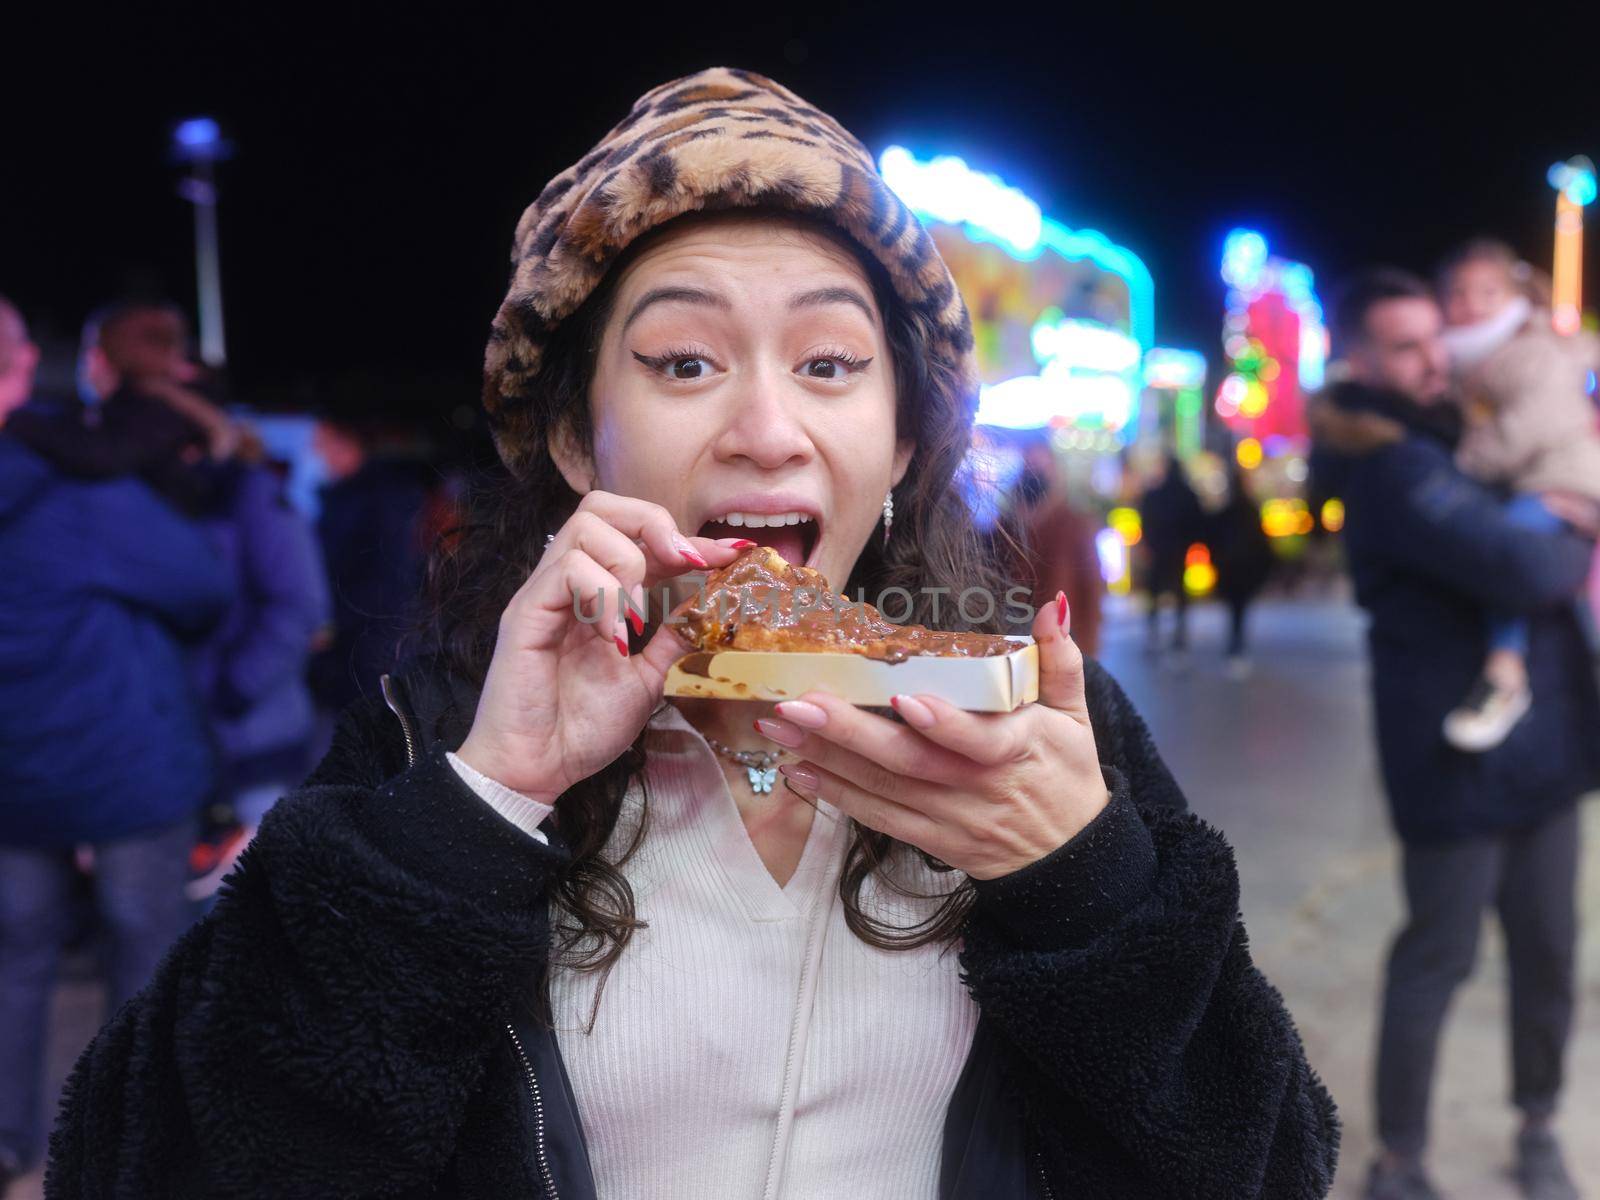 Portrait of a smiling latina woman eating a chocolate waffle with happy expression in a night fair